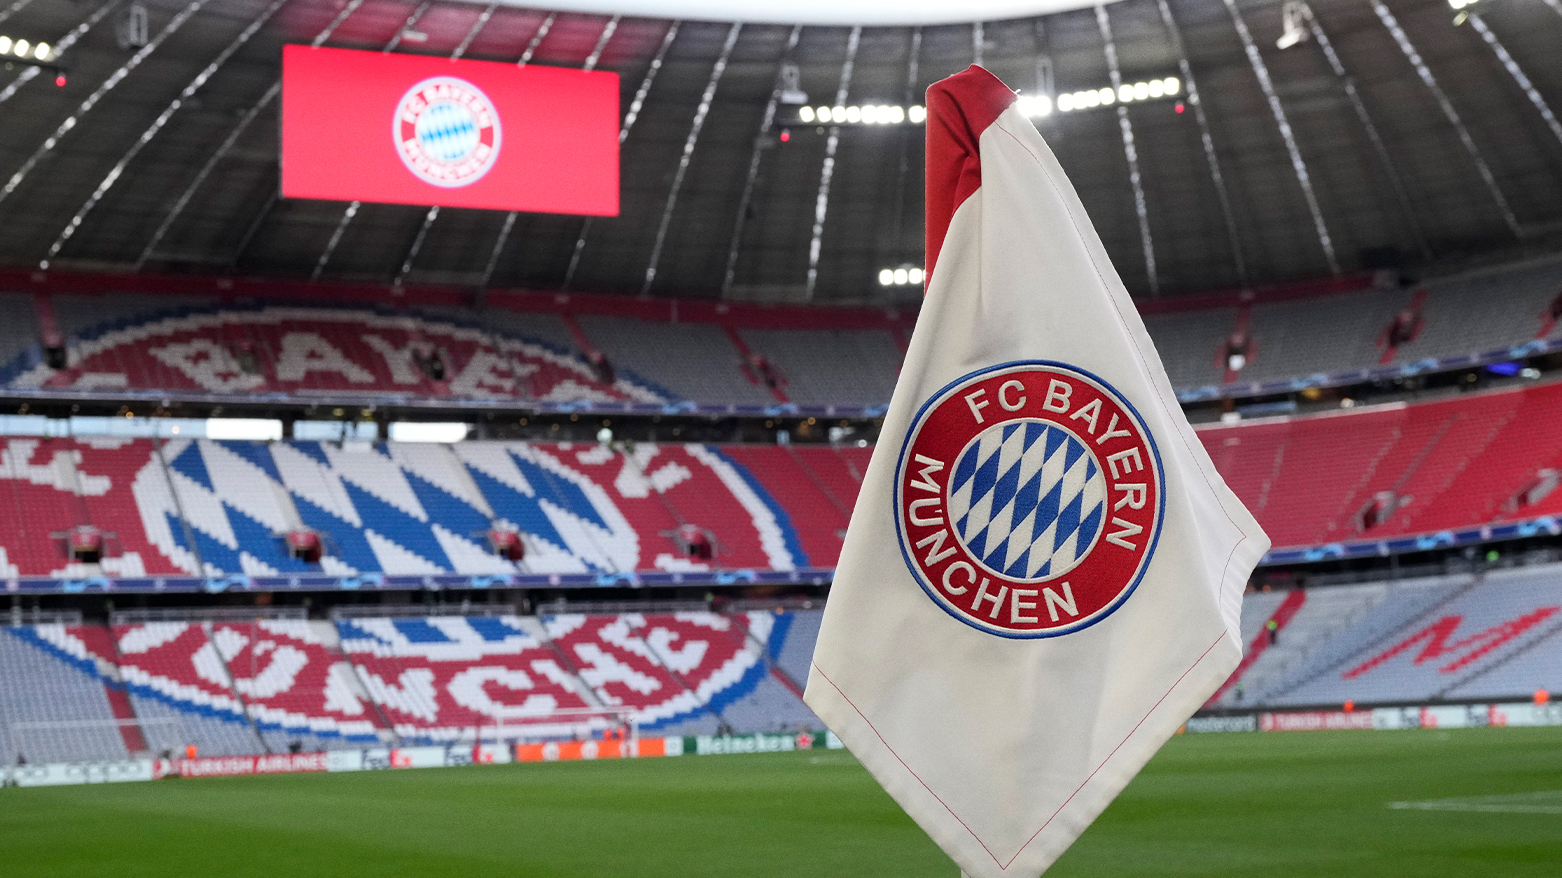 Bayern Munichs search for new coach hits roadblocks as top candidates decline offers